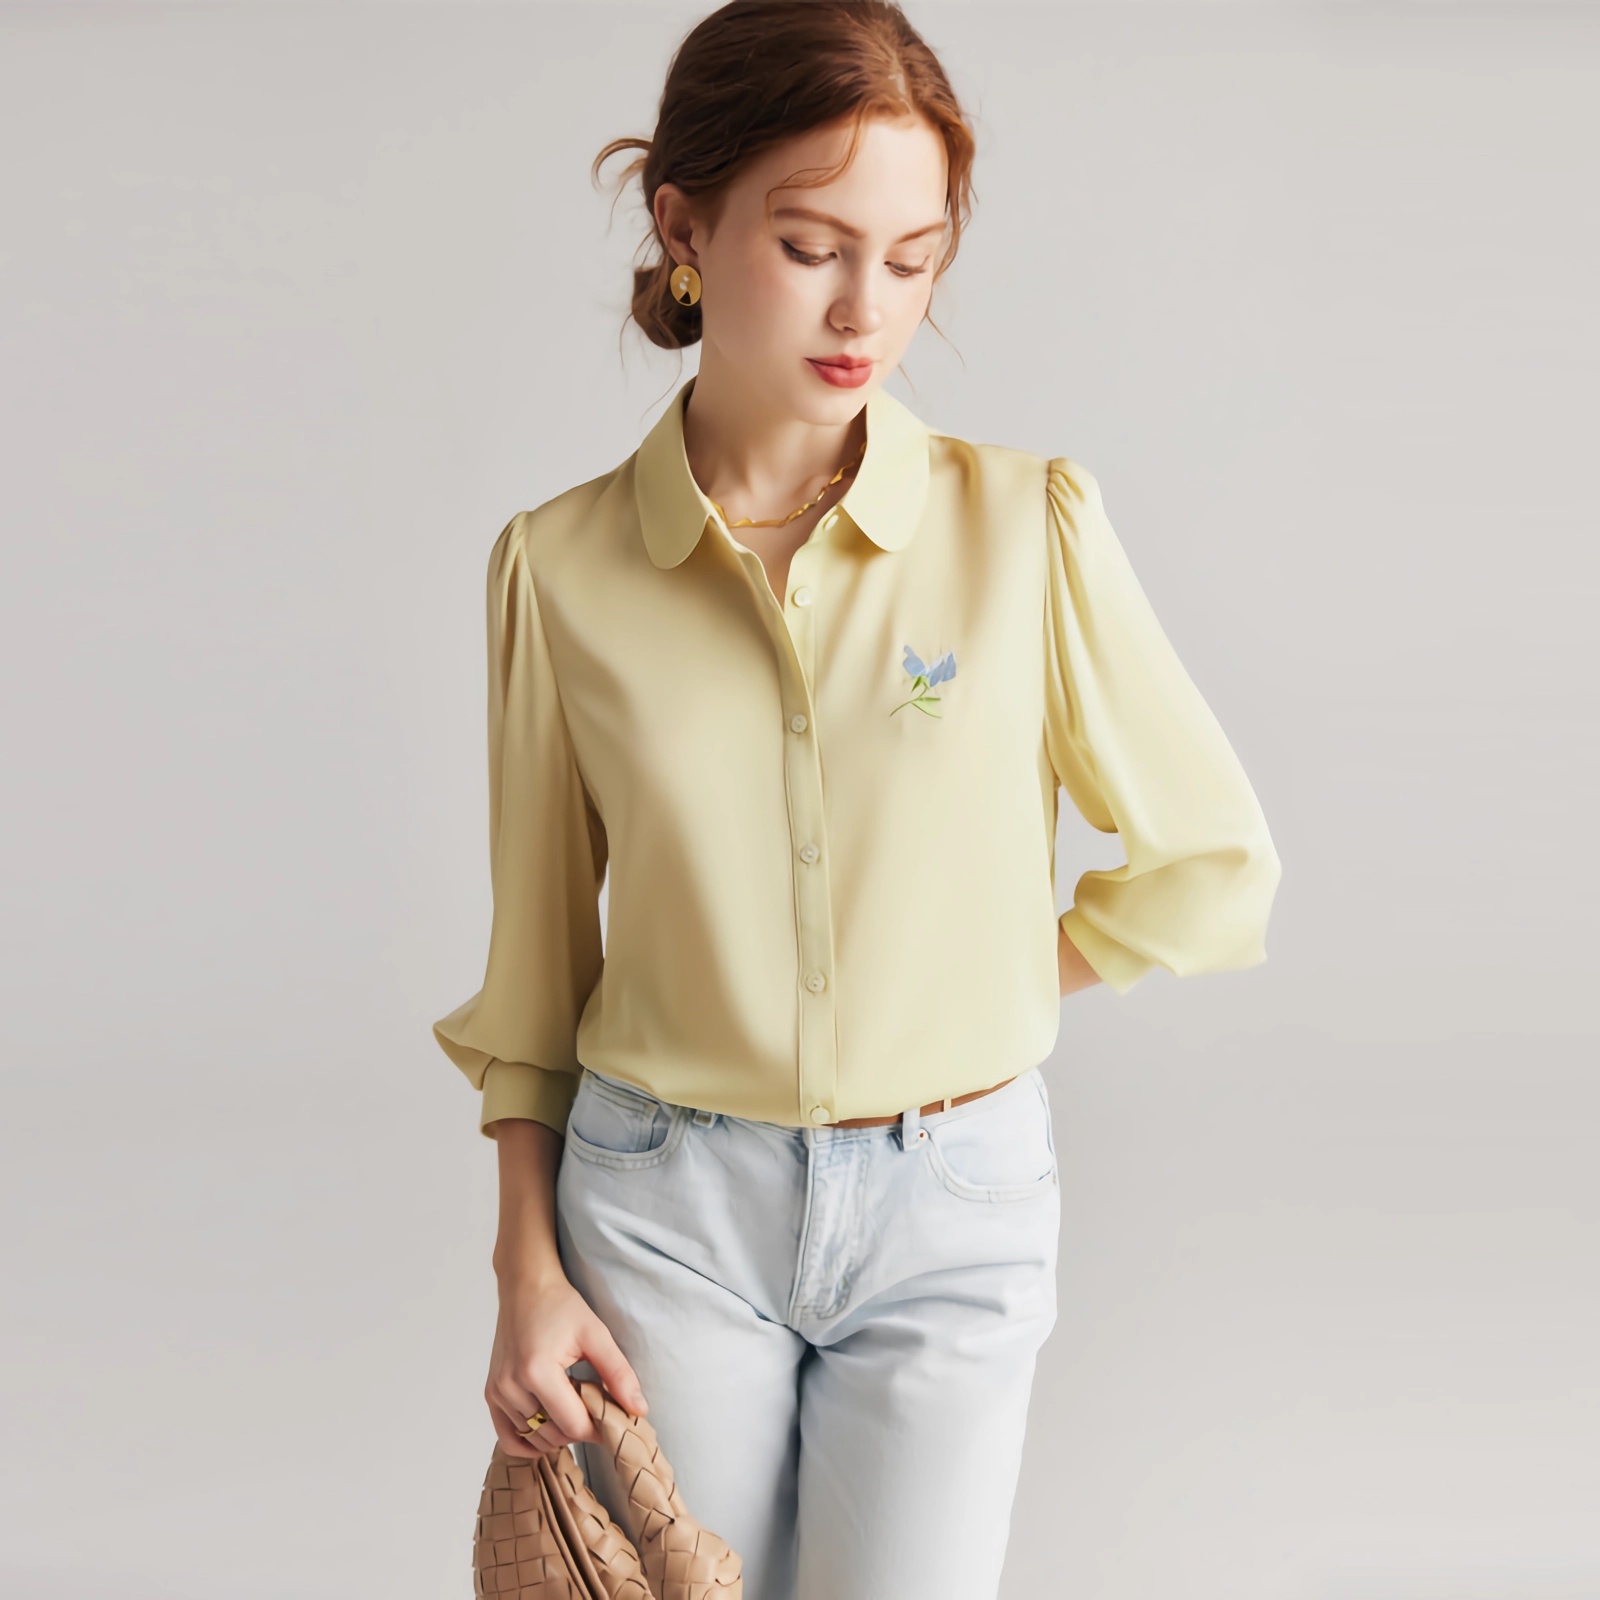 Crepe Silk Blouse Shirt Business For Women REAL SILK LIFE